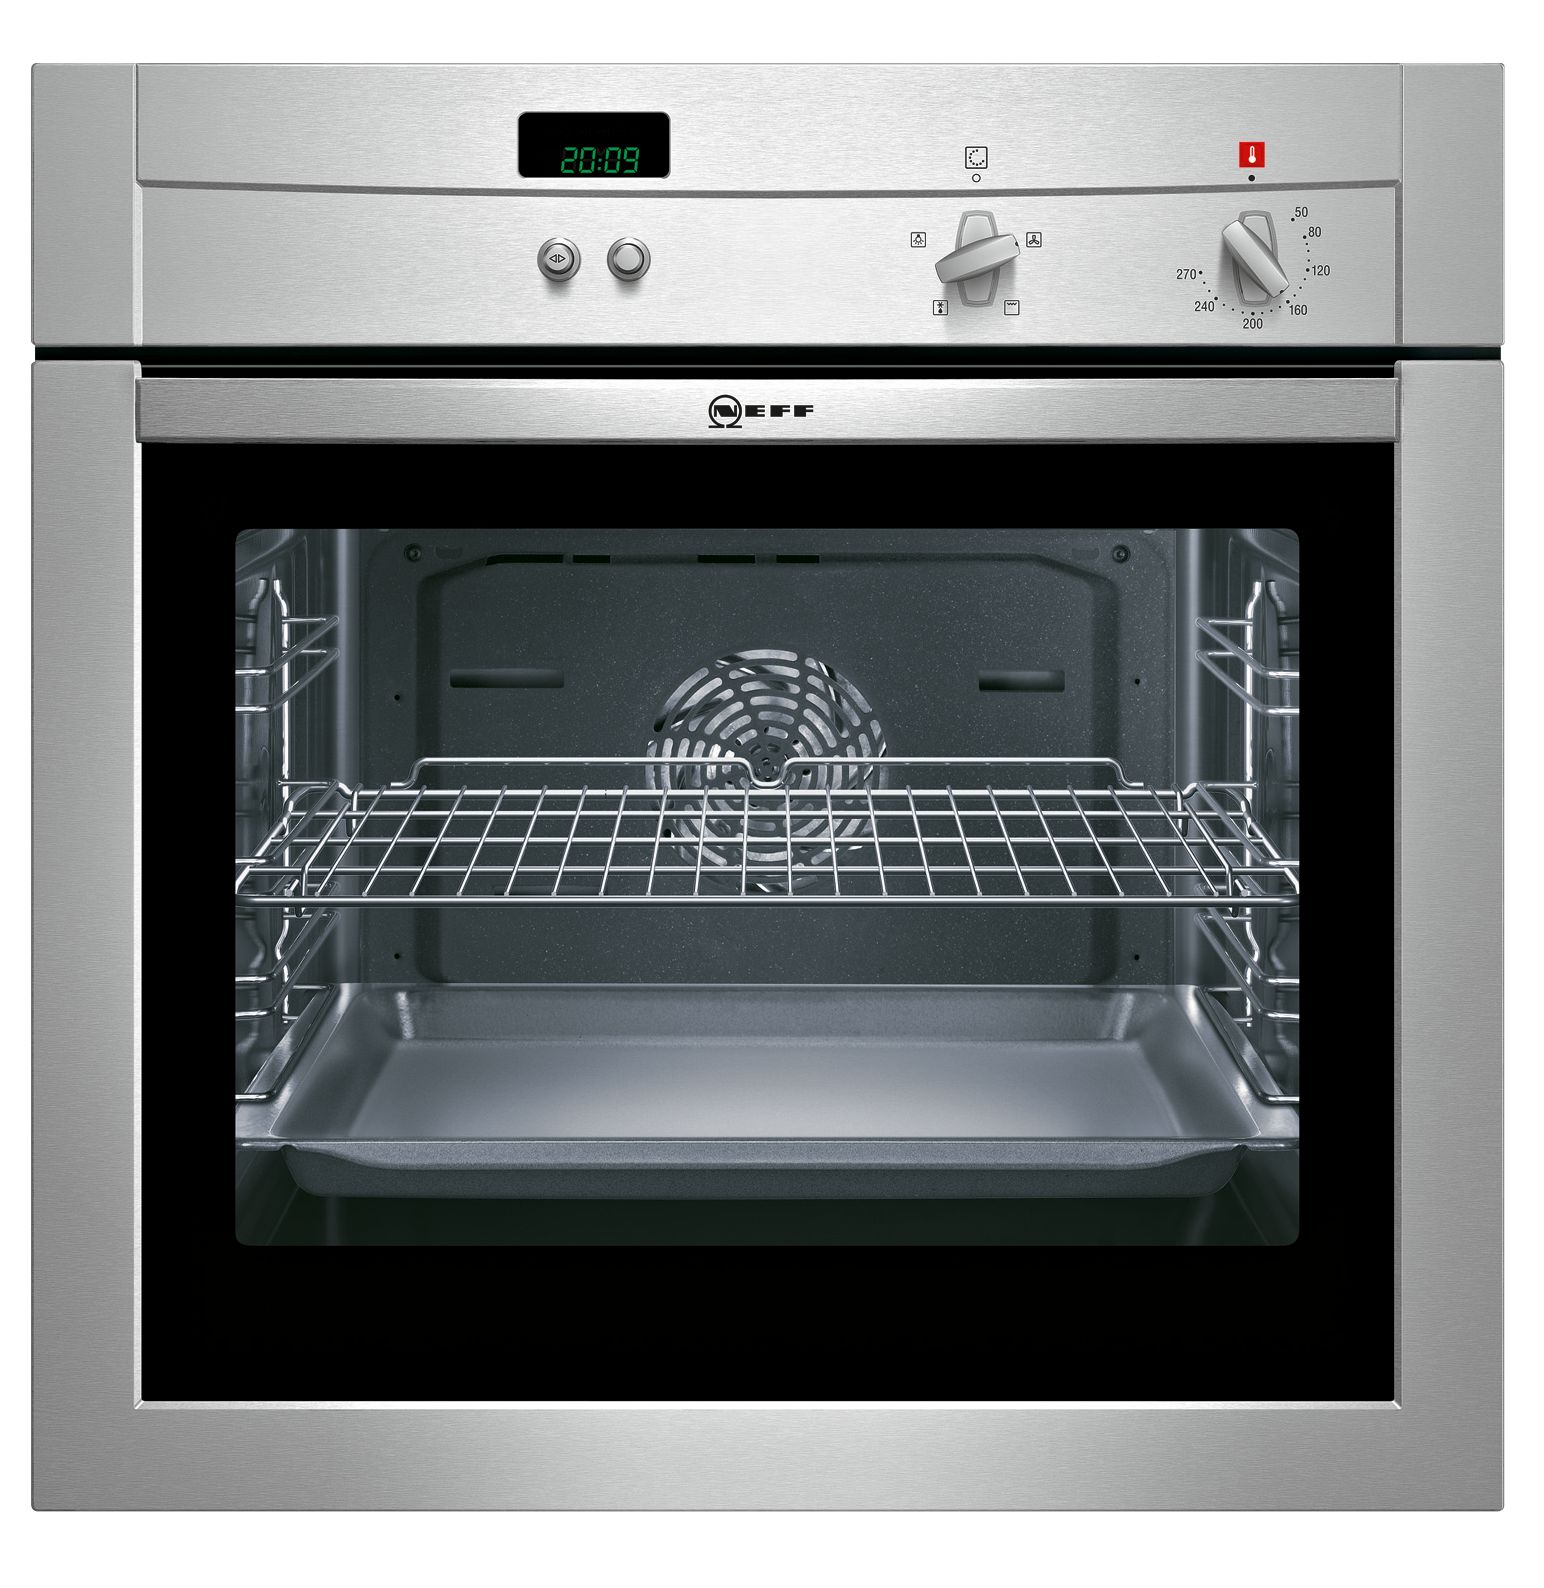 Neff B14M42N0GB Single Electric Oven, Stainless Steel at John Lewis